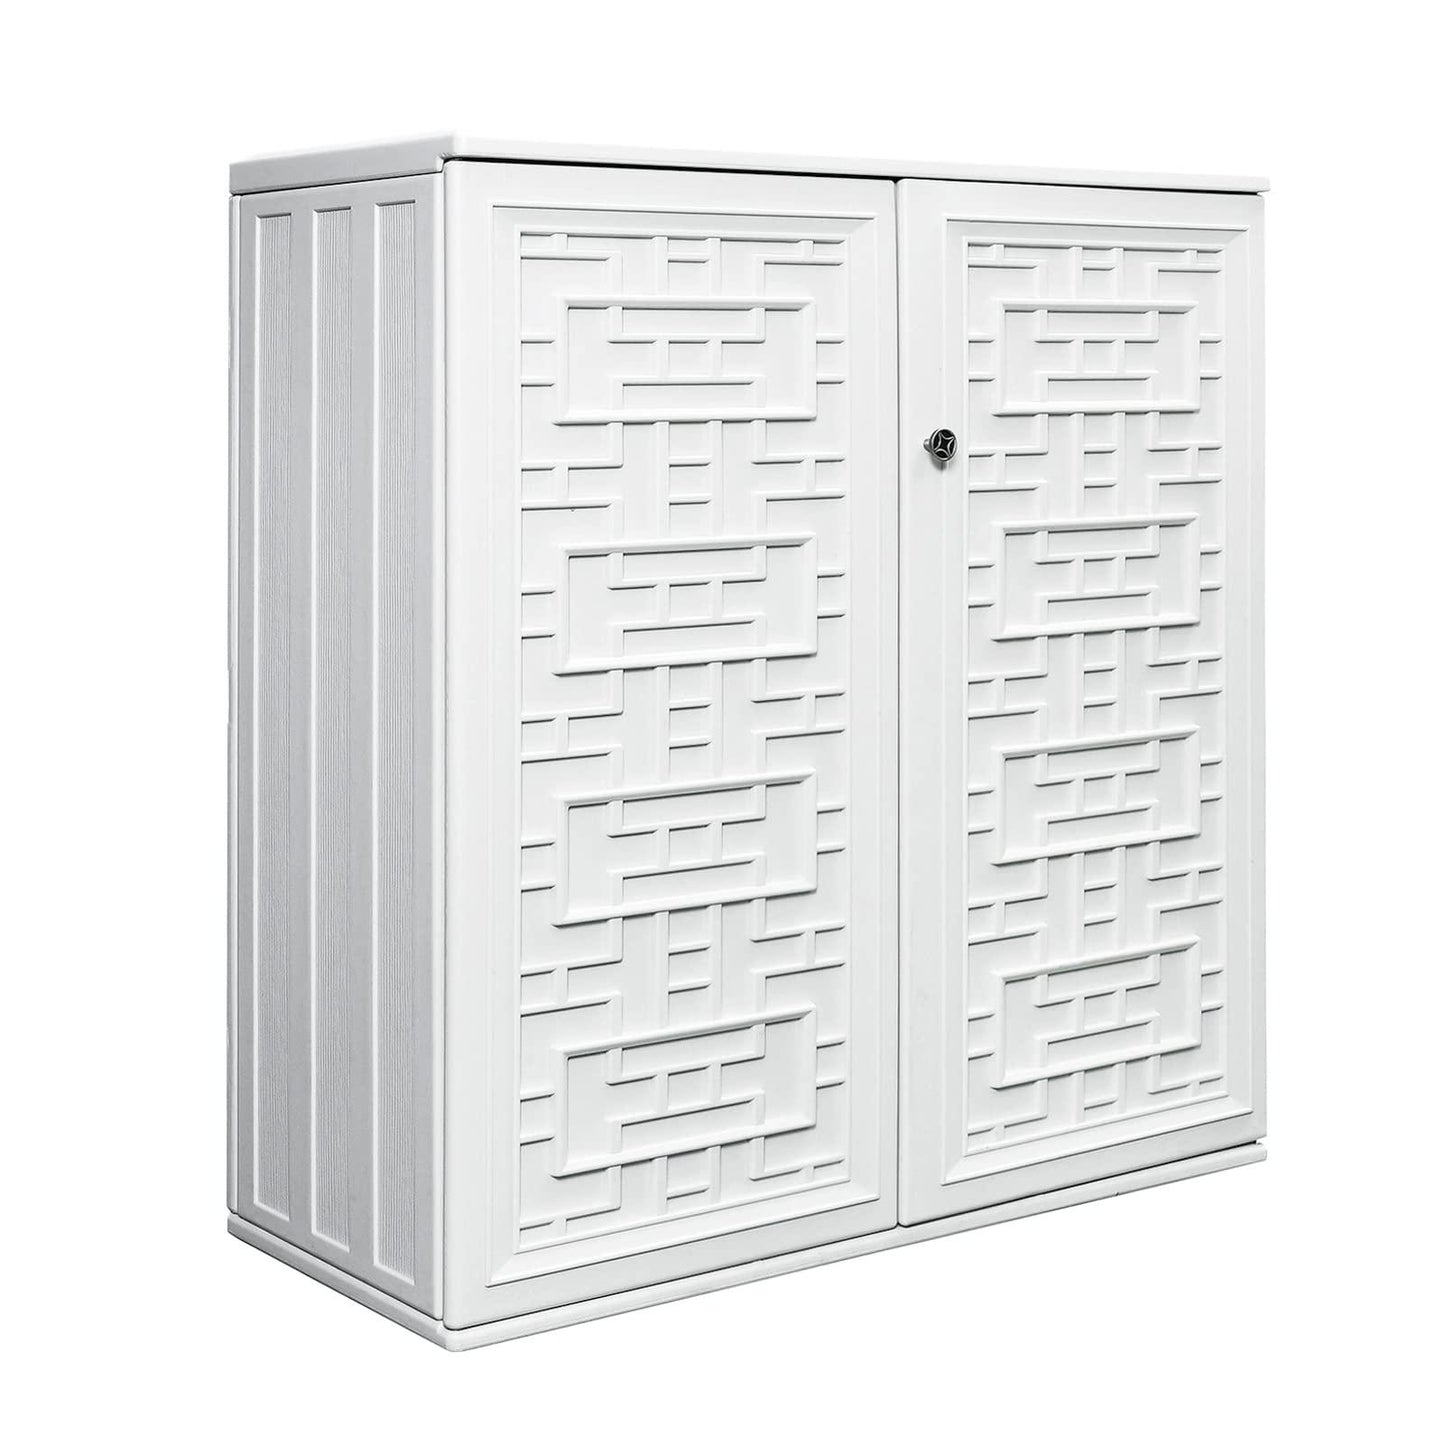 ADDOK 60-Gallon Storage Cabinet Light Weight Resin Indoor/Outdoor Storage Unit for Patio, Garden, Veranda with 1 Laminate Shelves (Ivory White) - CookCave